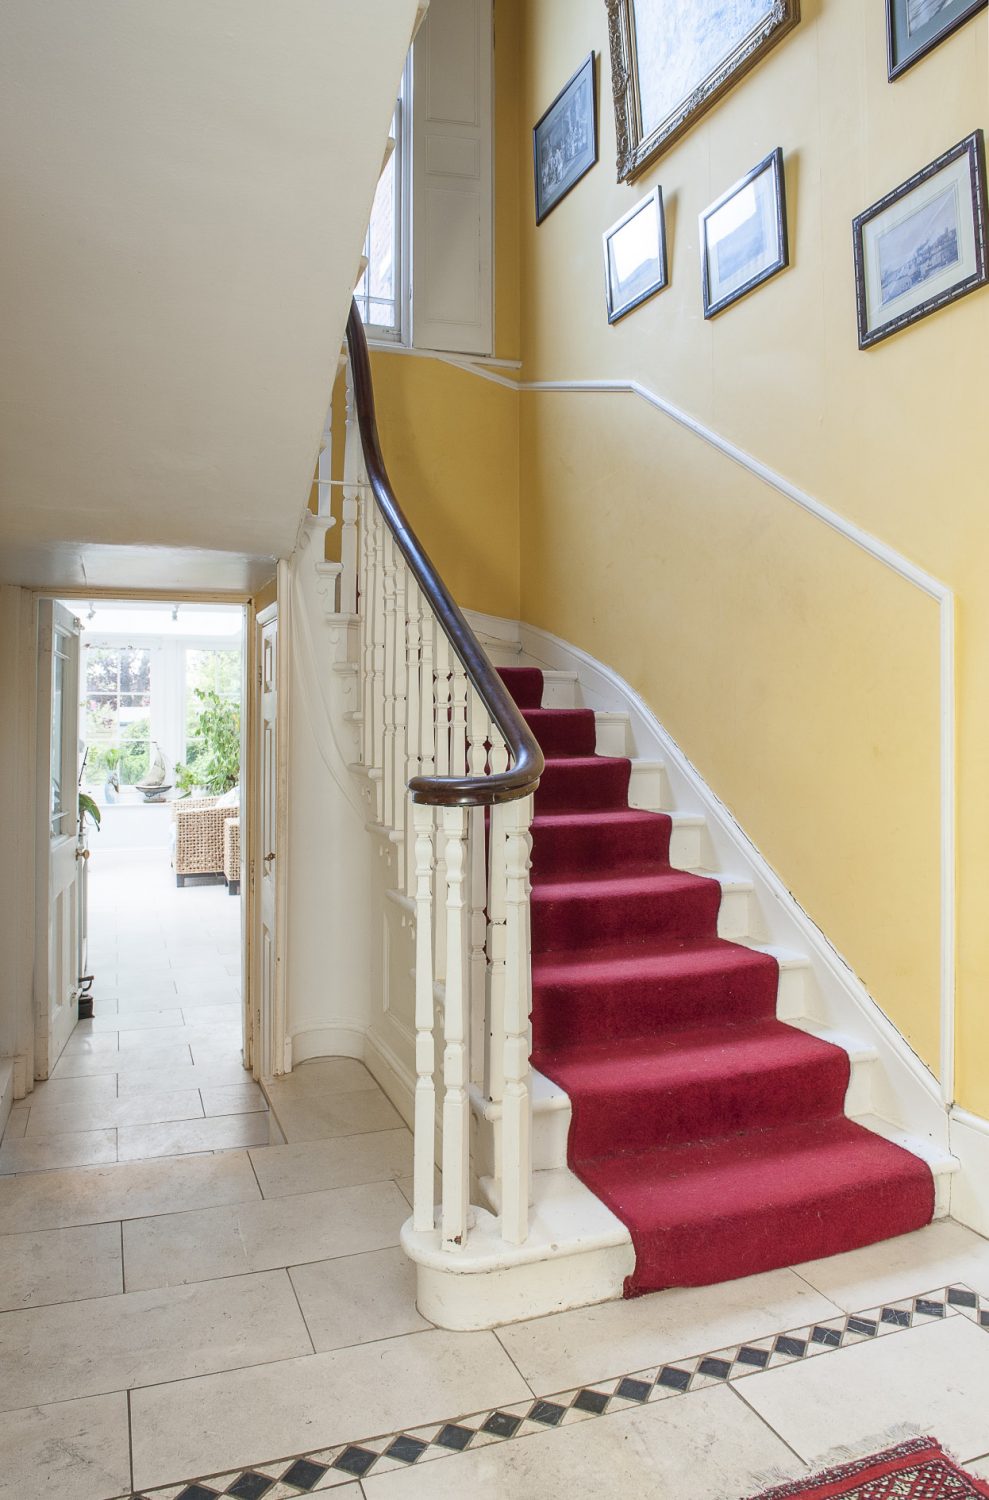 The sunny yellow of the hallway continues up to the soaring ceiling of the landing